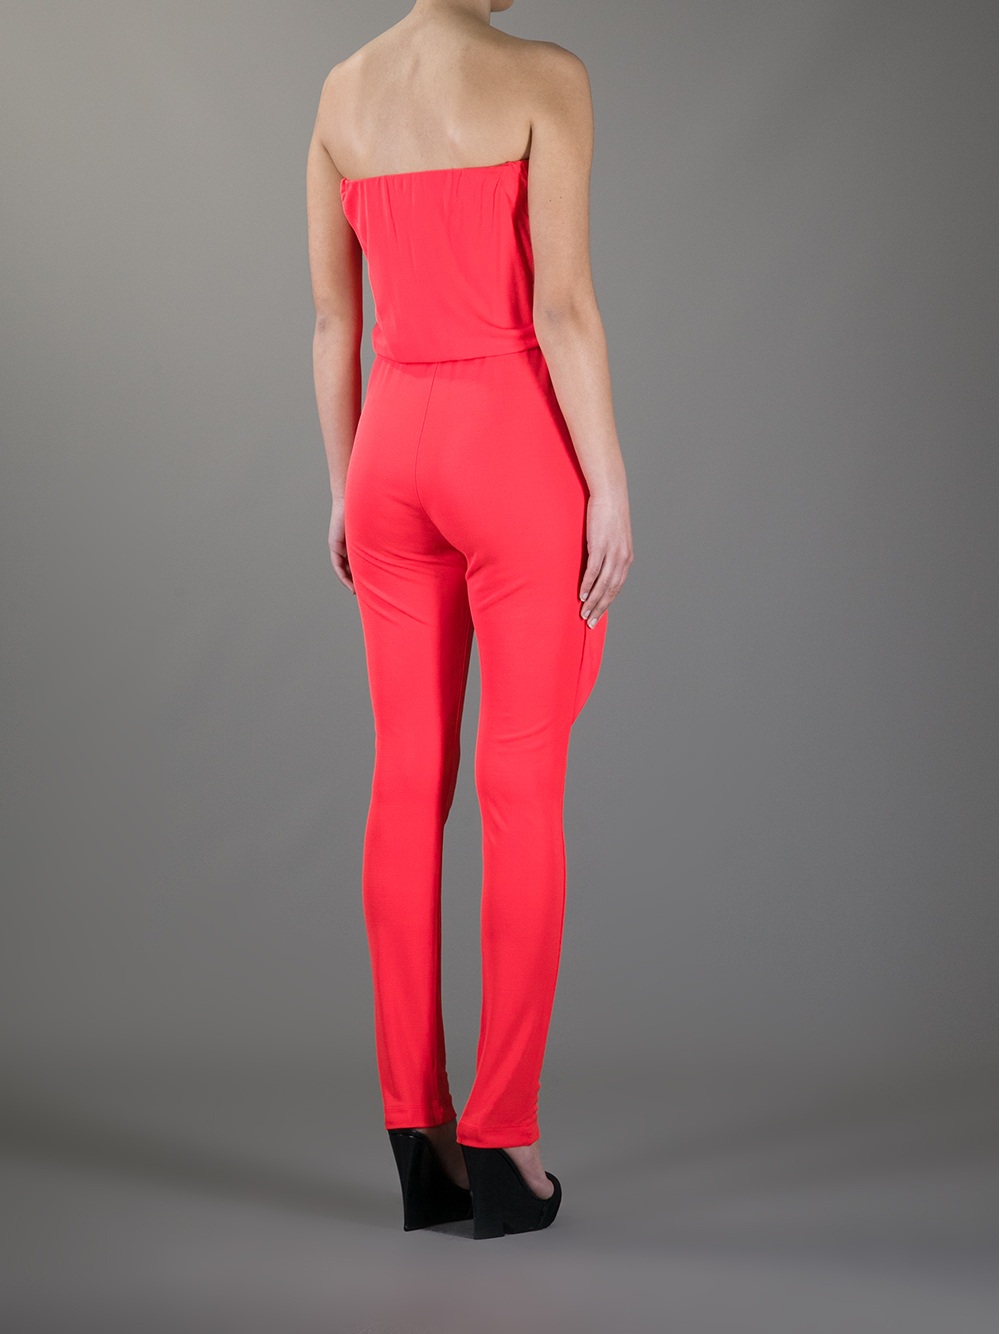 Lyst - Msgm Draped Jumpsuit in Red